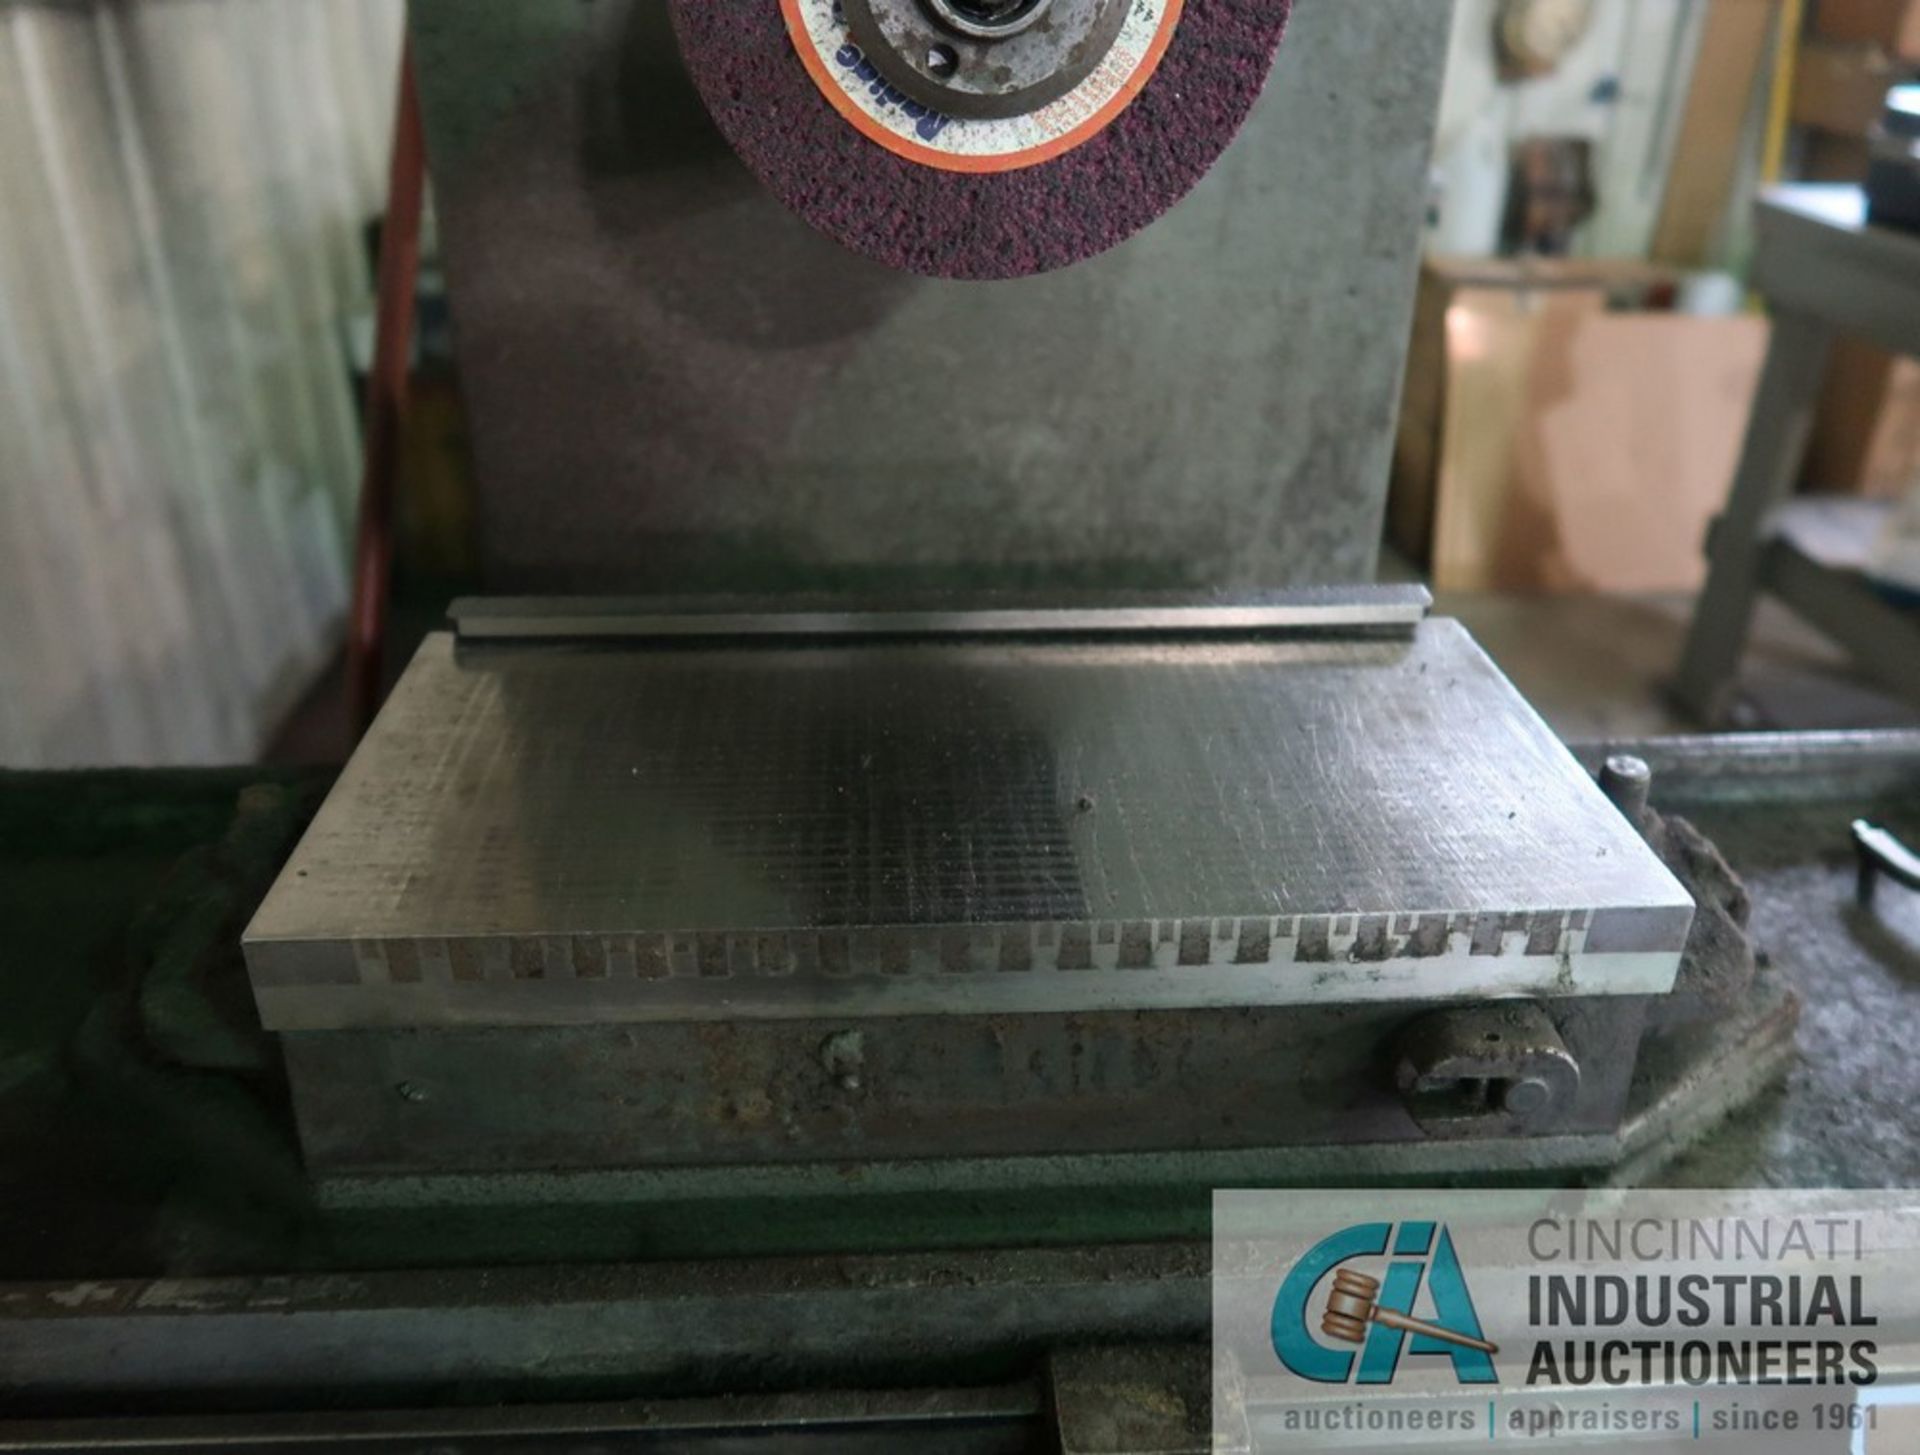 6" X 12" DOALL MODEL VS-612 HAND FEED SURFACE GRINDER, S/N 355-81757, 3 PHASE, 220 VOLTS - Image 4 of 7